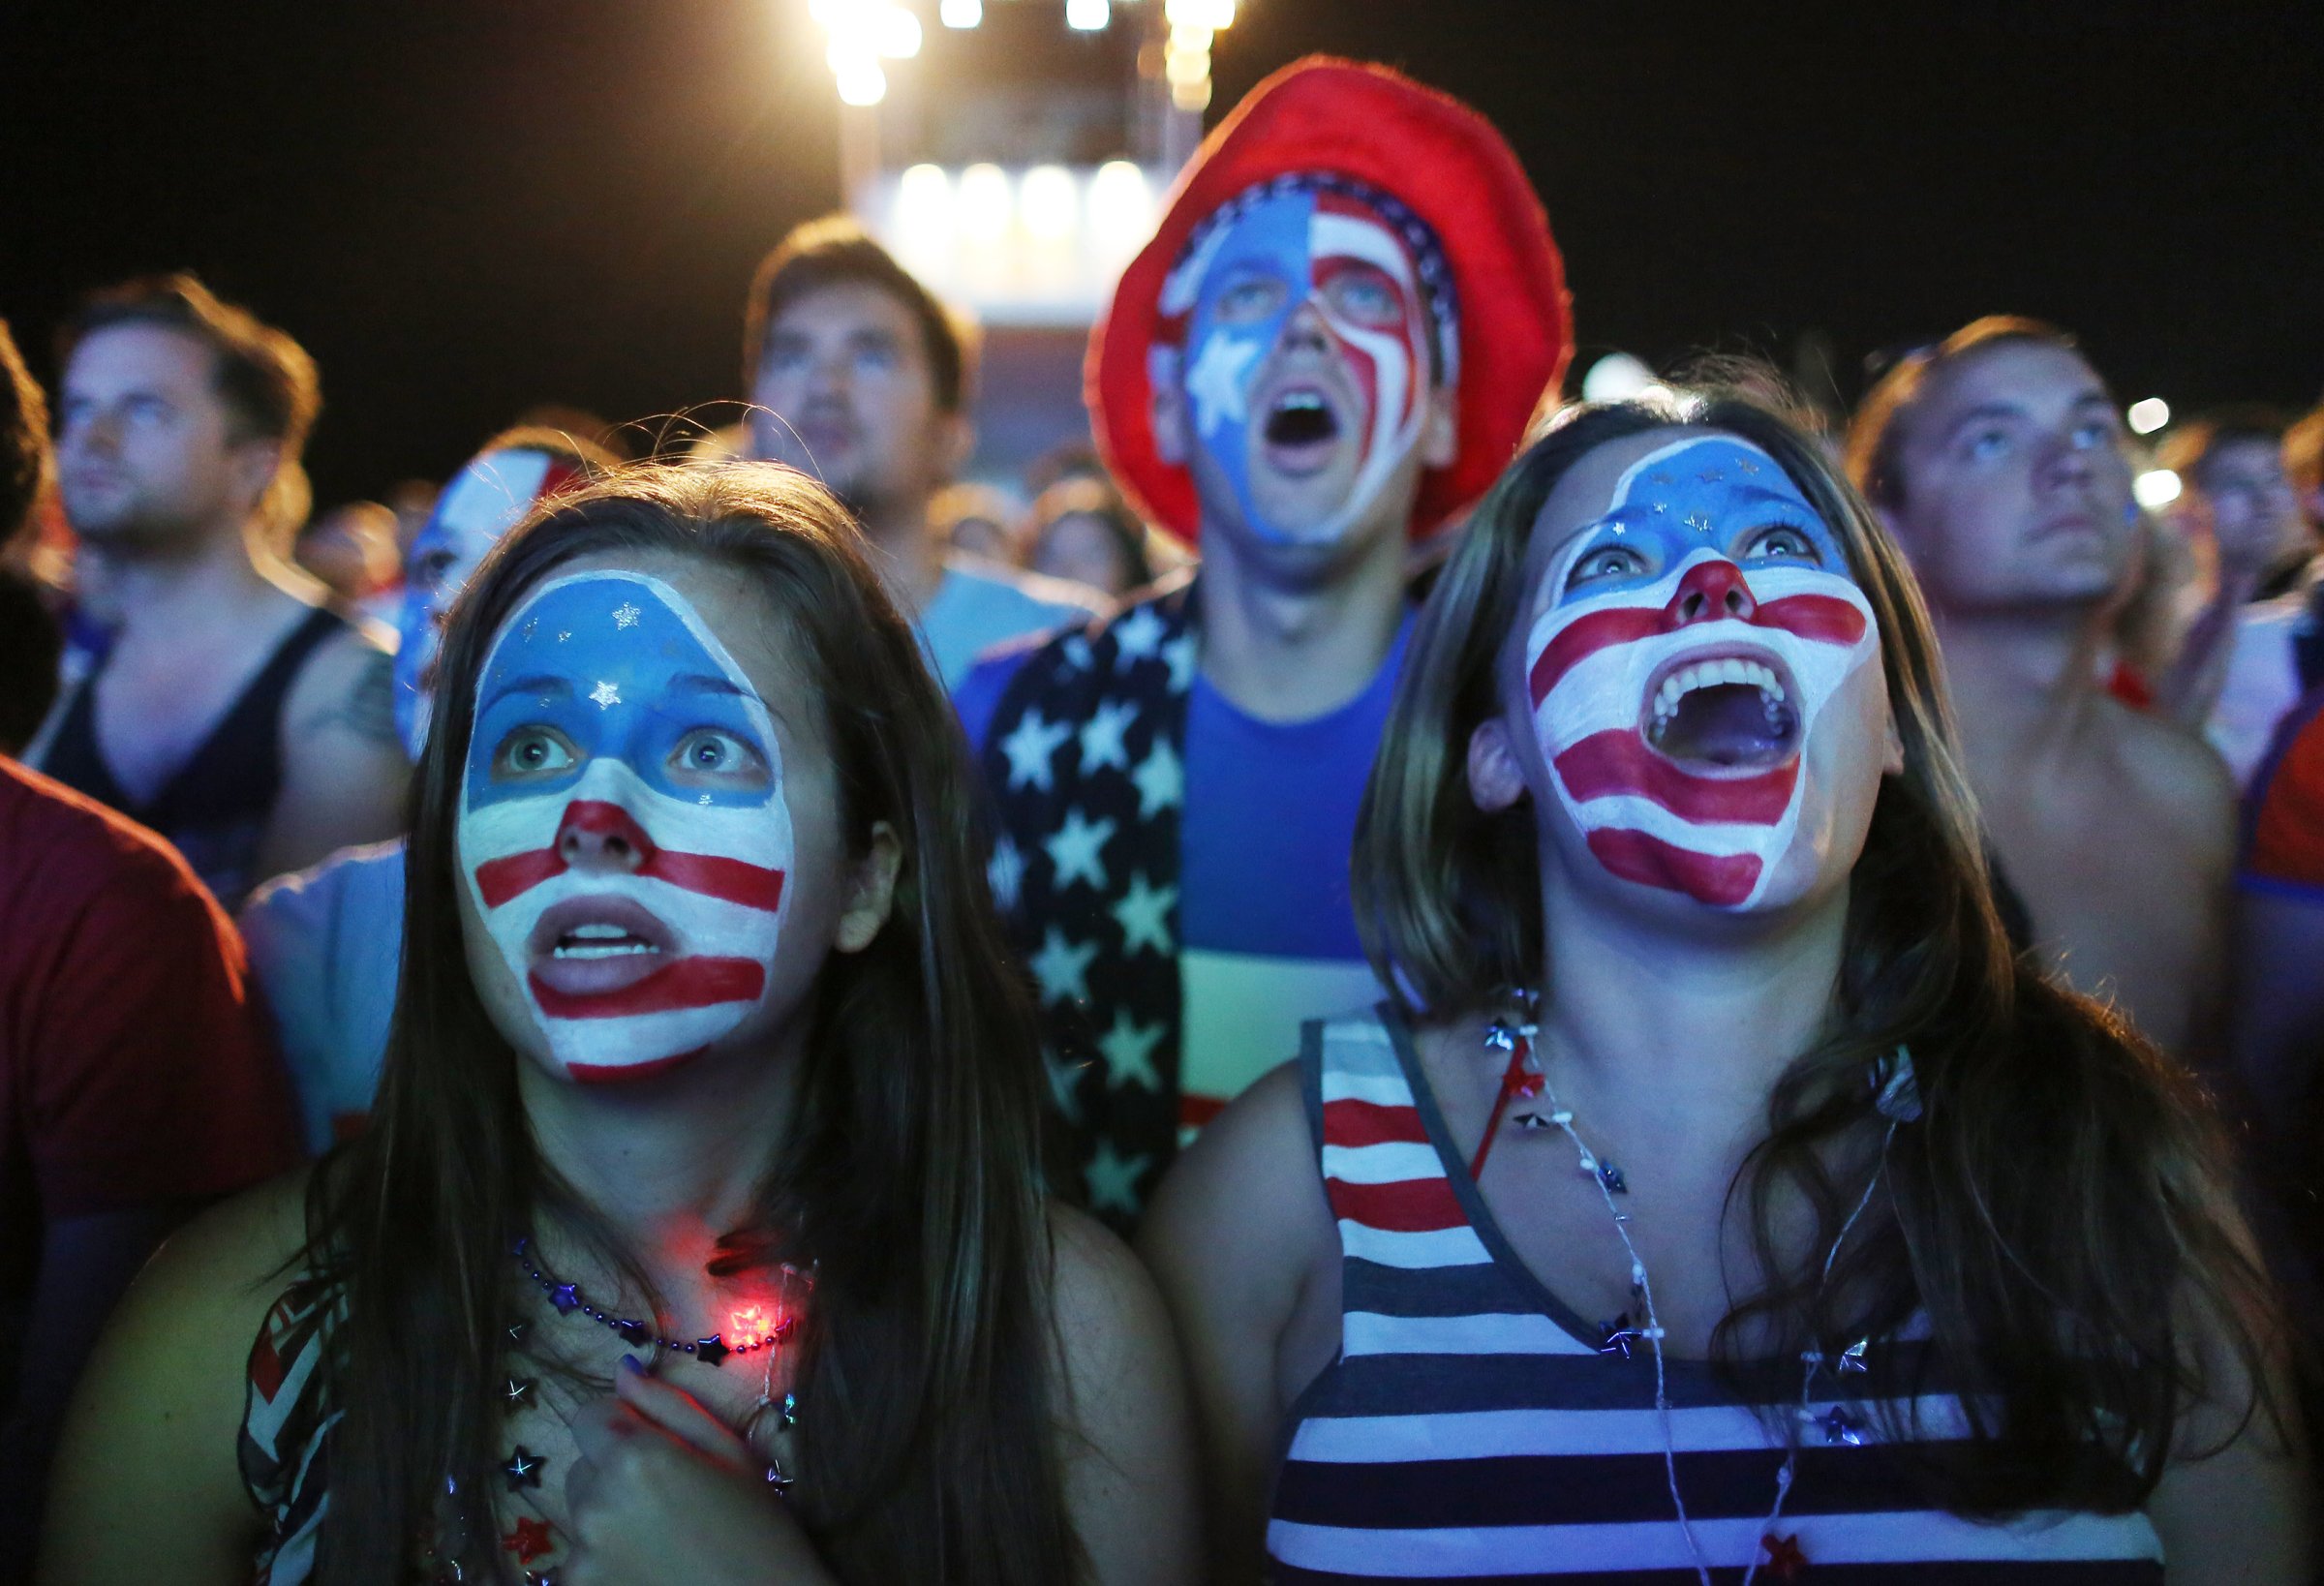 Fans with their faces painted with the U.S. national soccer team's colors, watch a live telecast of the group G World Cup match between United States and Portugal, inside the FIFA Fan Fest area on Copacabana beach, in Rio de Janeiro on June 22, 2014.